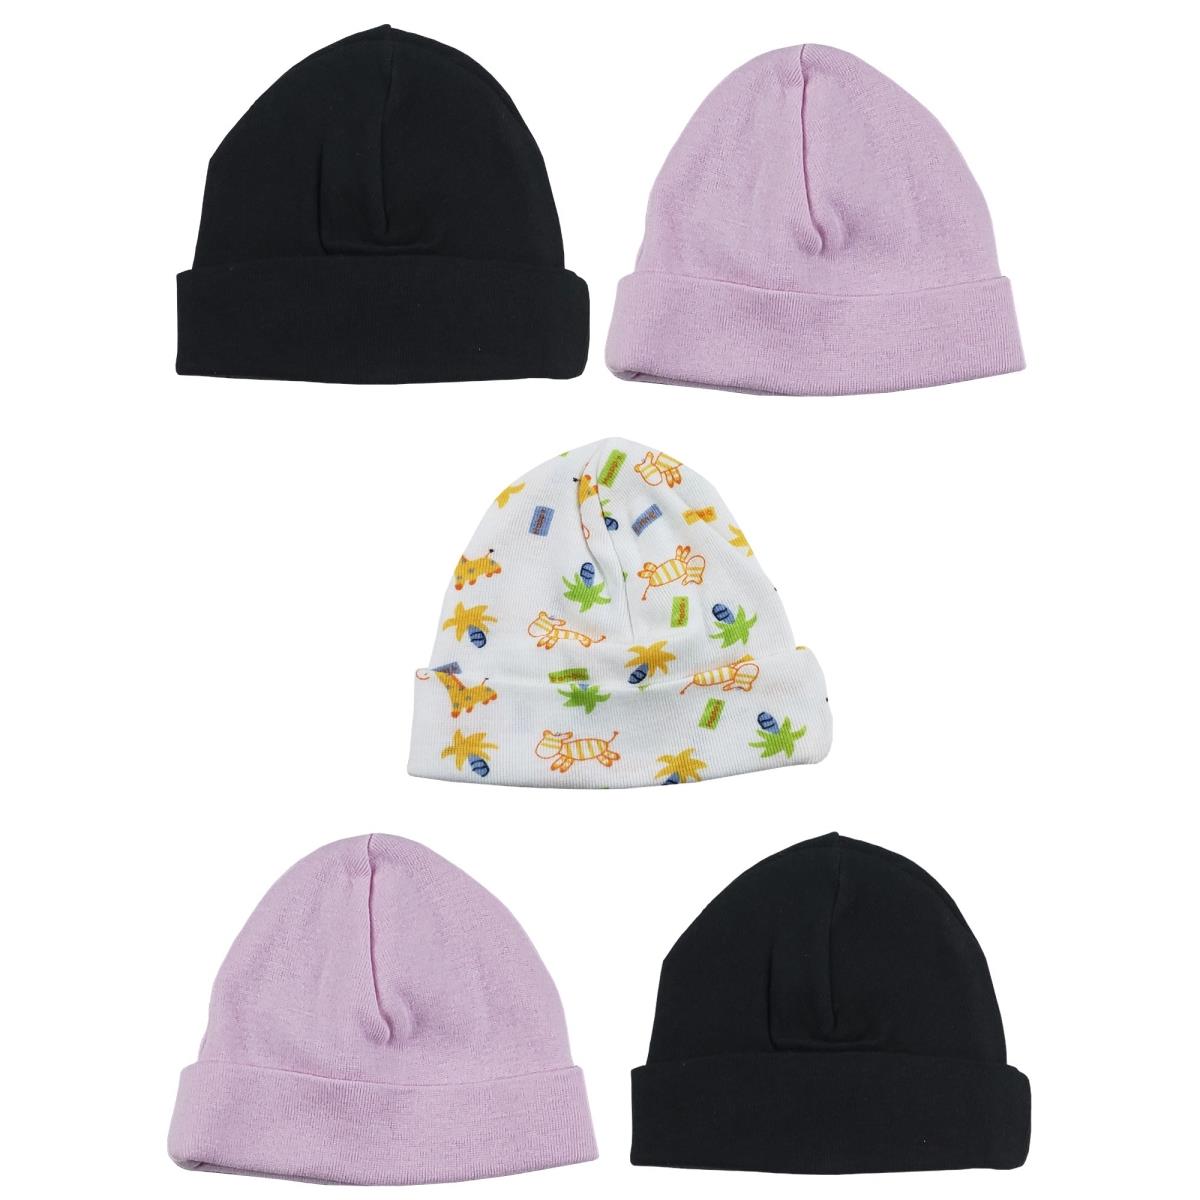 Picture of Bambini LS-0324 Girls Baby Cap - Black&#44; Prints & Pink - One Size - 5 per Pack